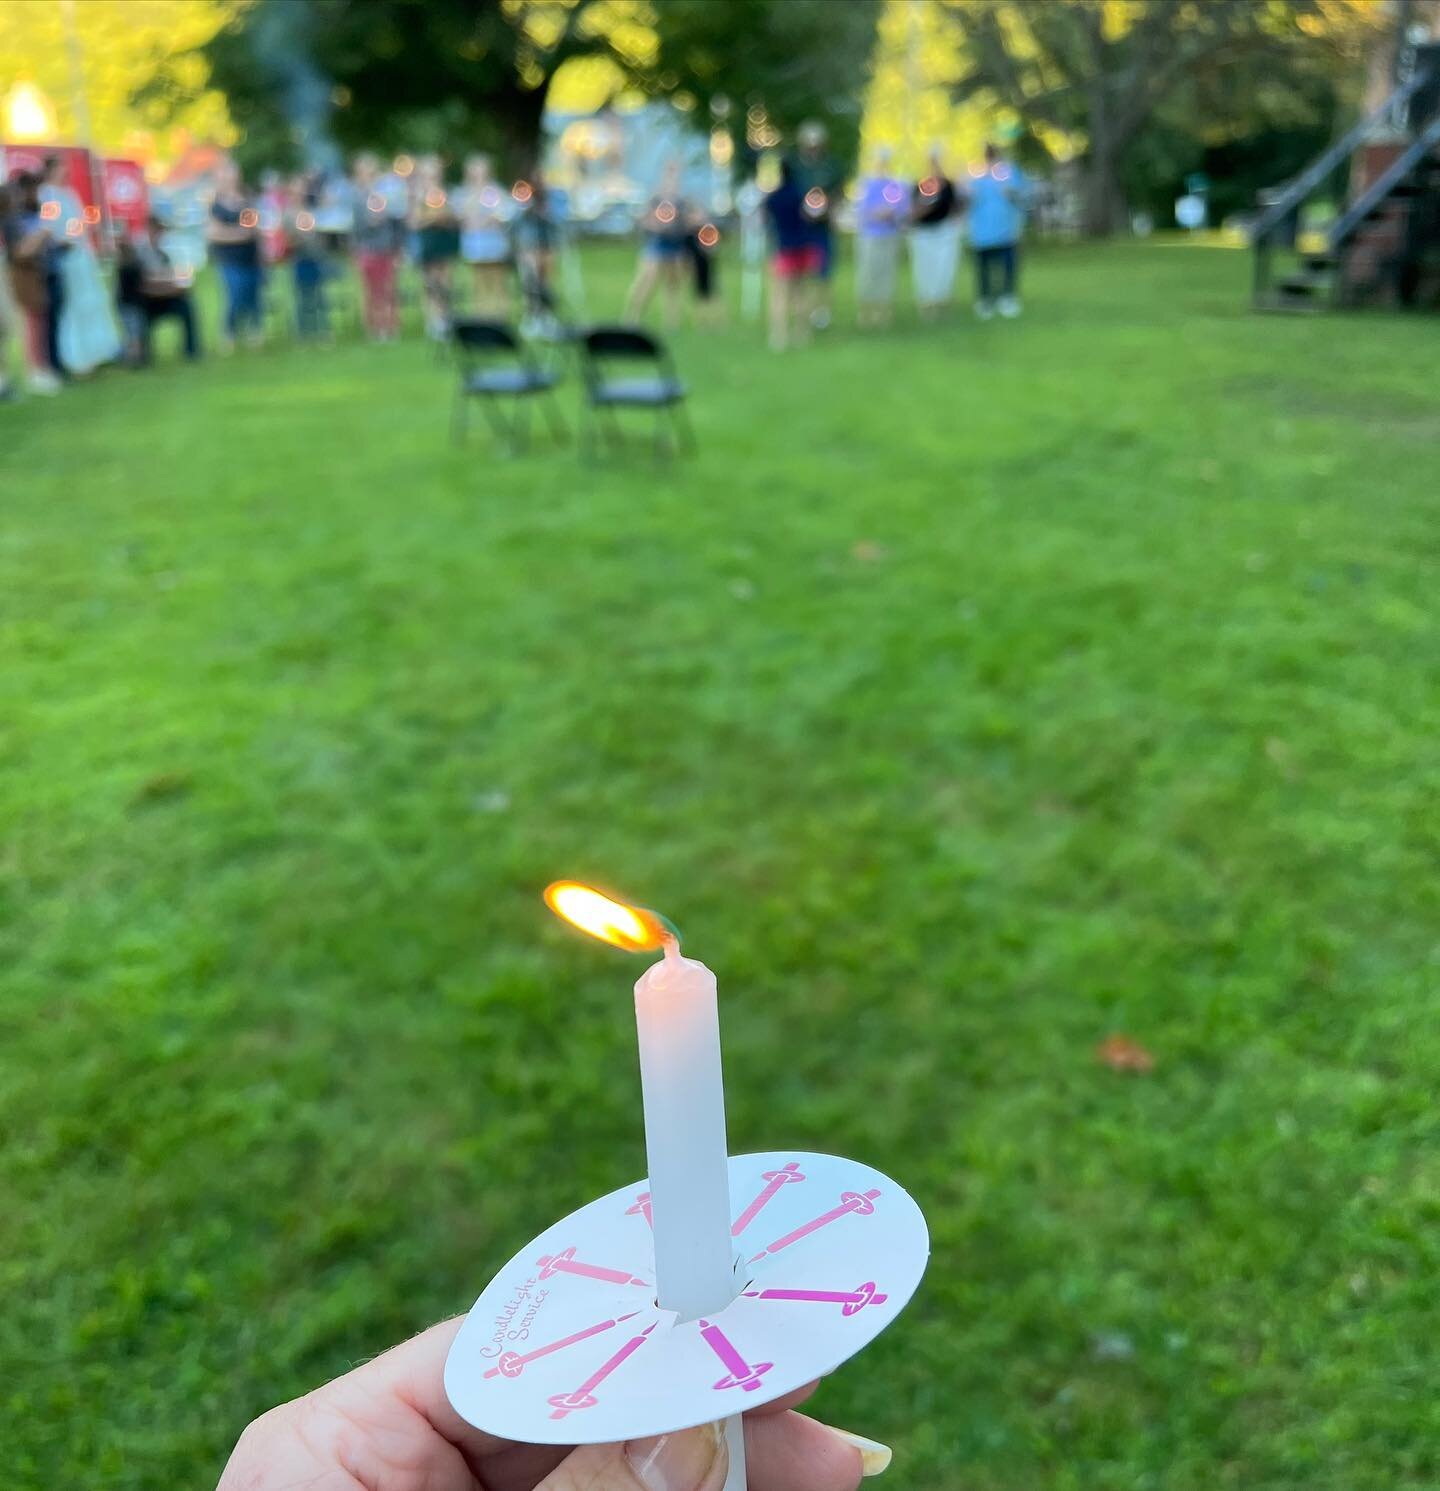 Today is International Overdose Awareness Day, and just like the majority of Windsor County residents I too have felt the impact of overdoses.

My generation has lost classmates, friends, and young people who had so much more life left to live. 

In 